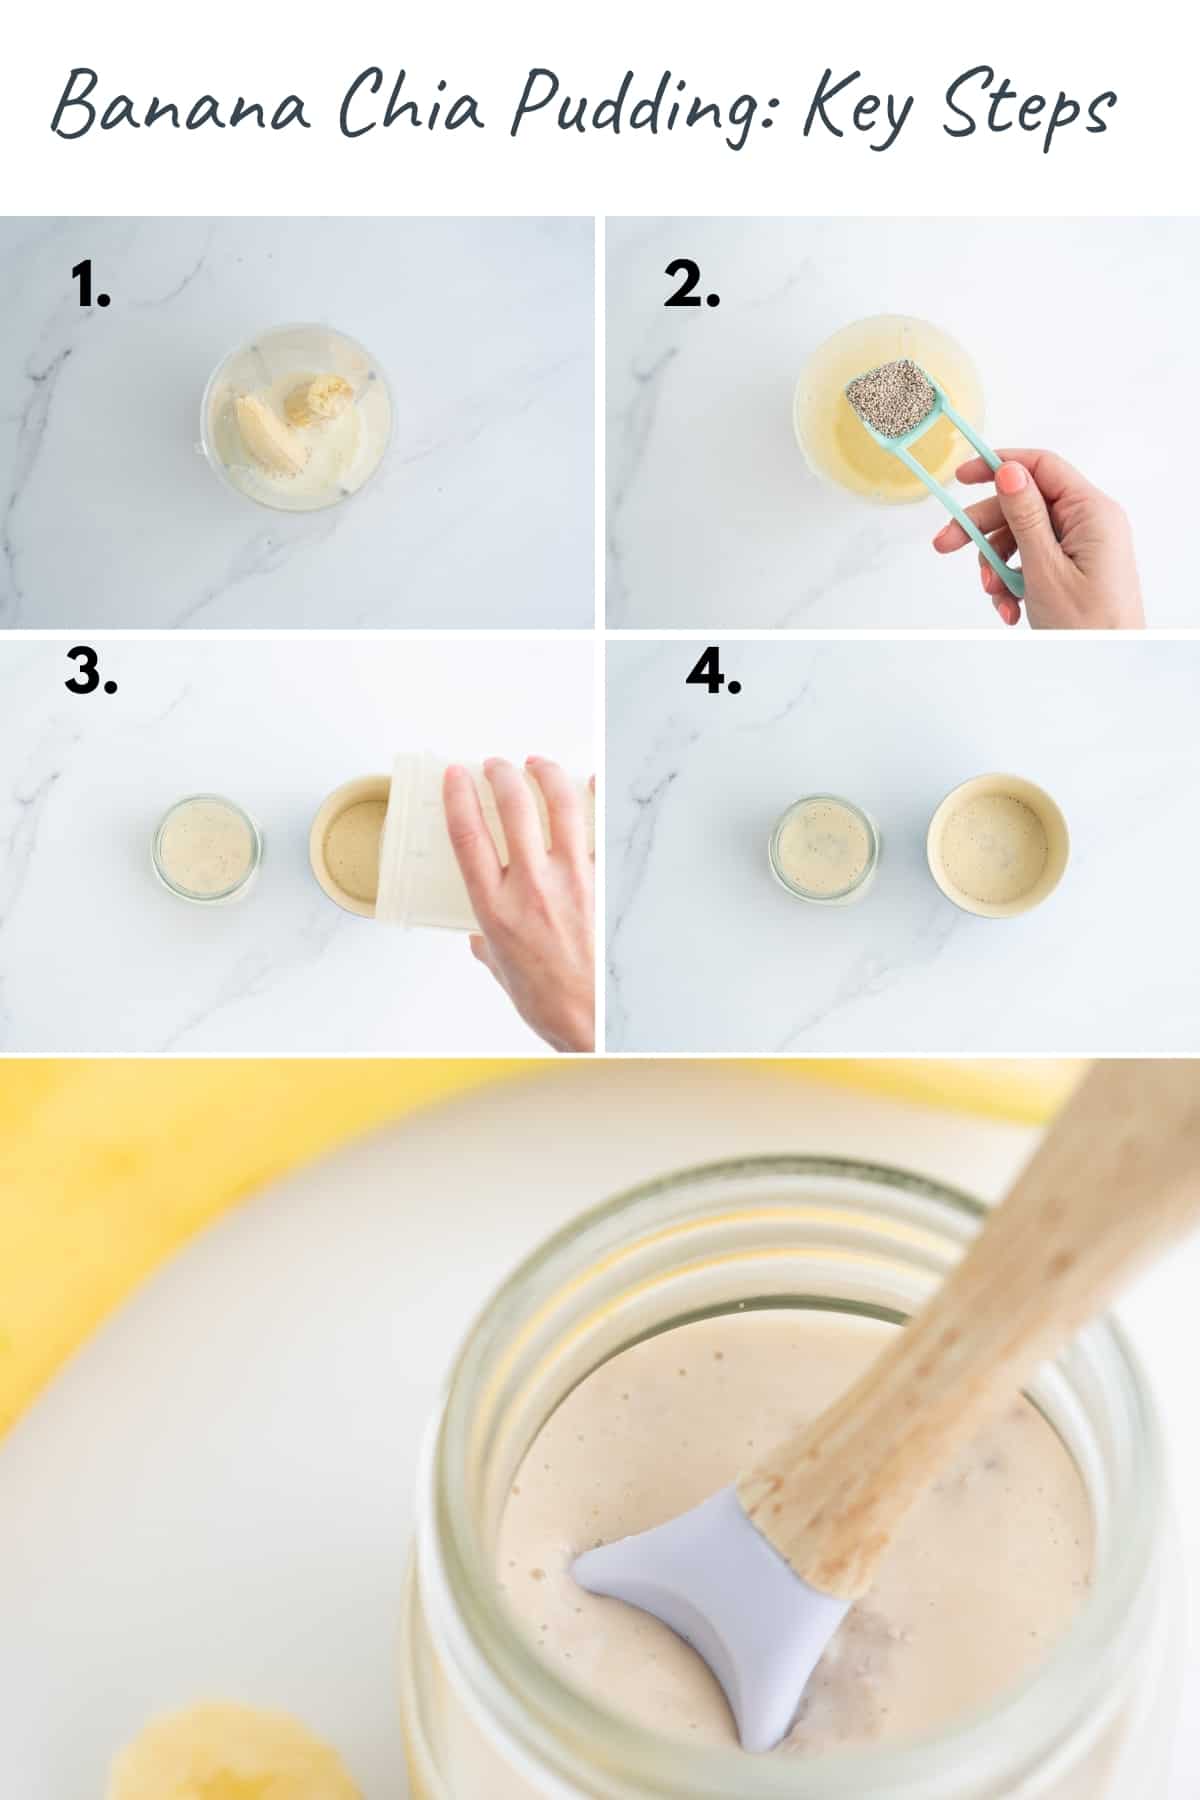 5 photo collage showing the key steps to making banana chia pudding.